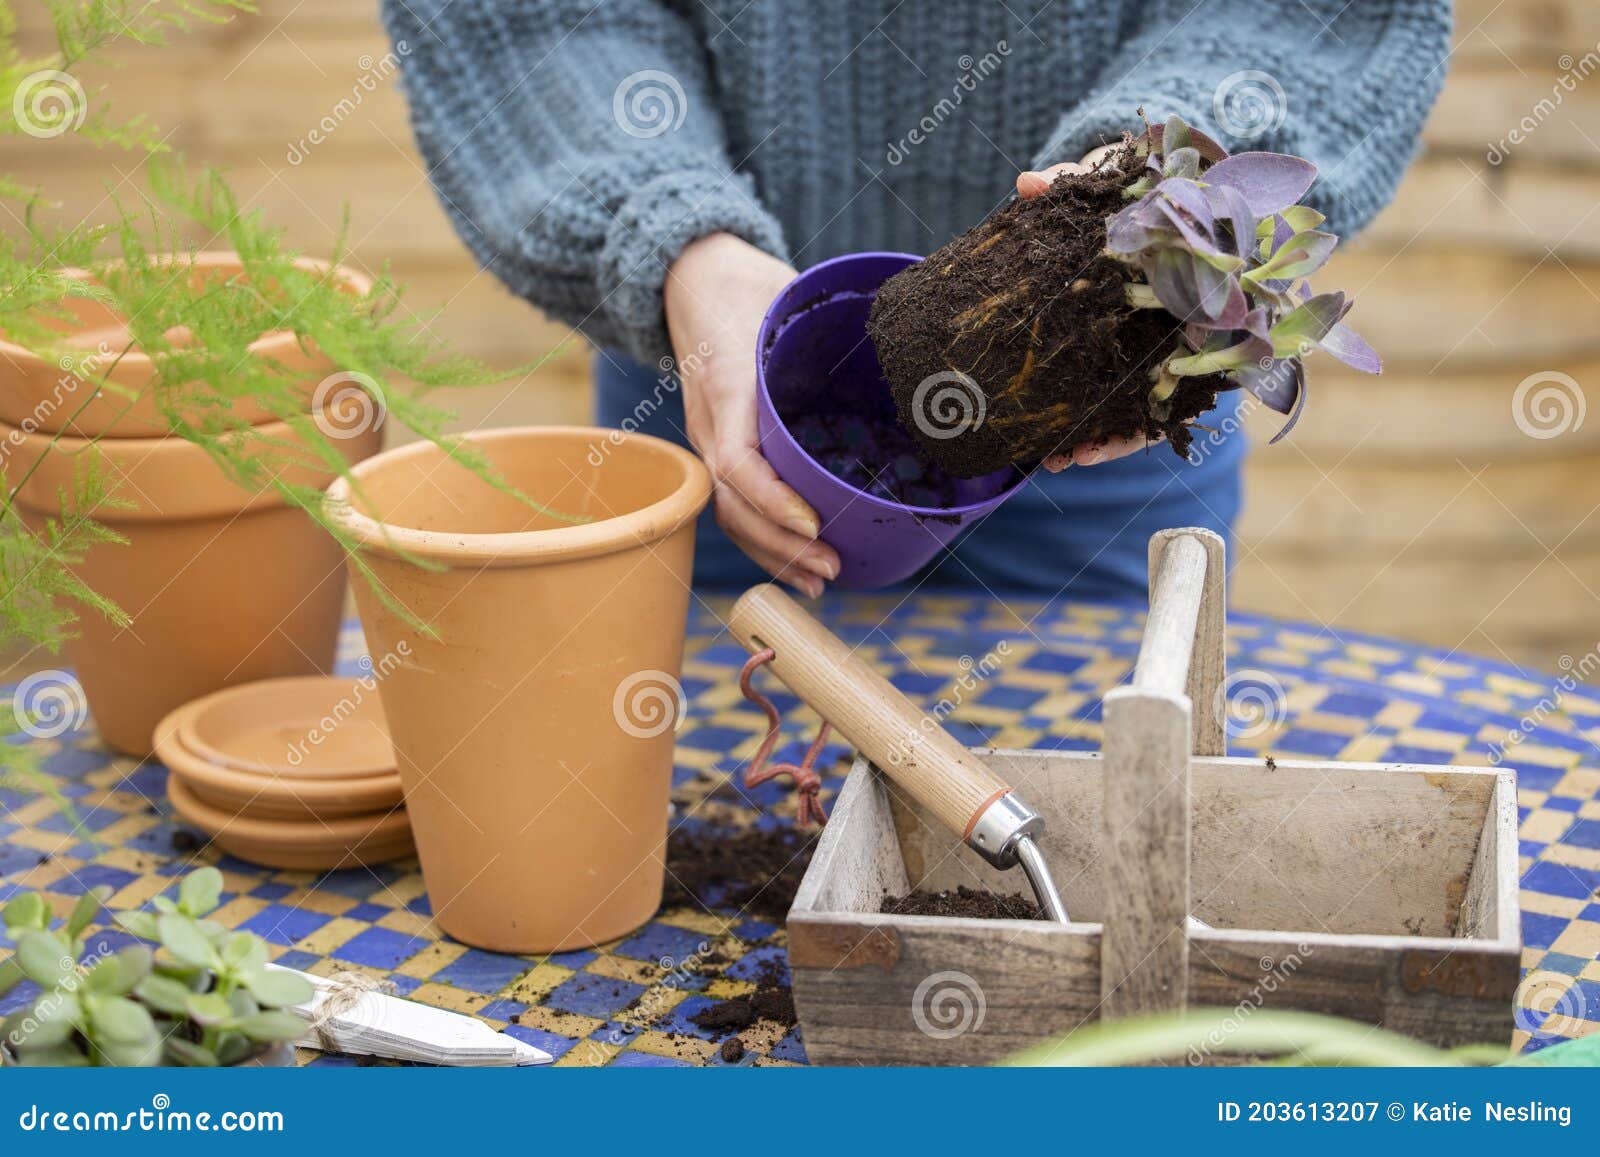 close up of woman re-potting houseplant into larger compost filled pot outdoors